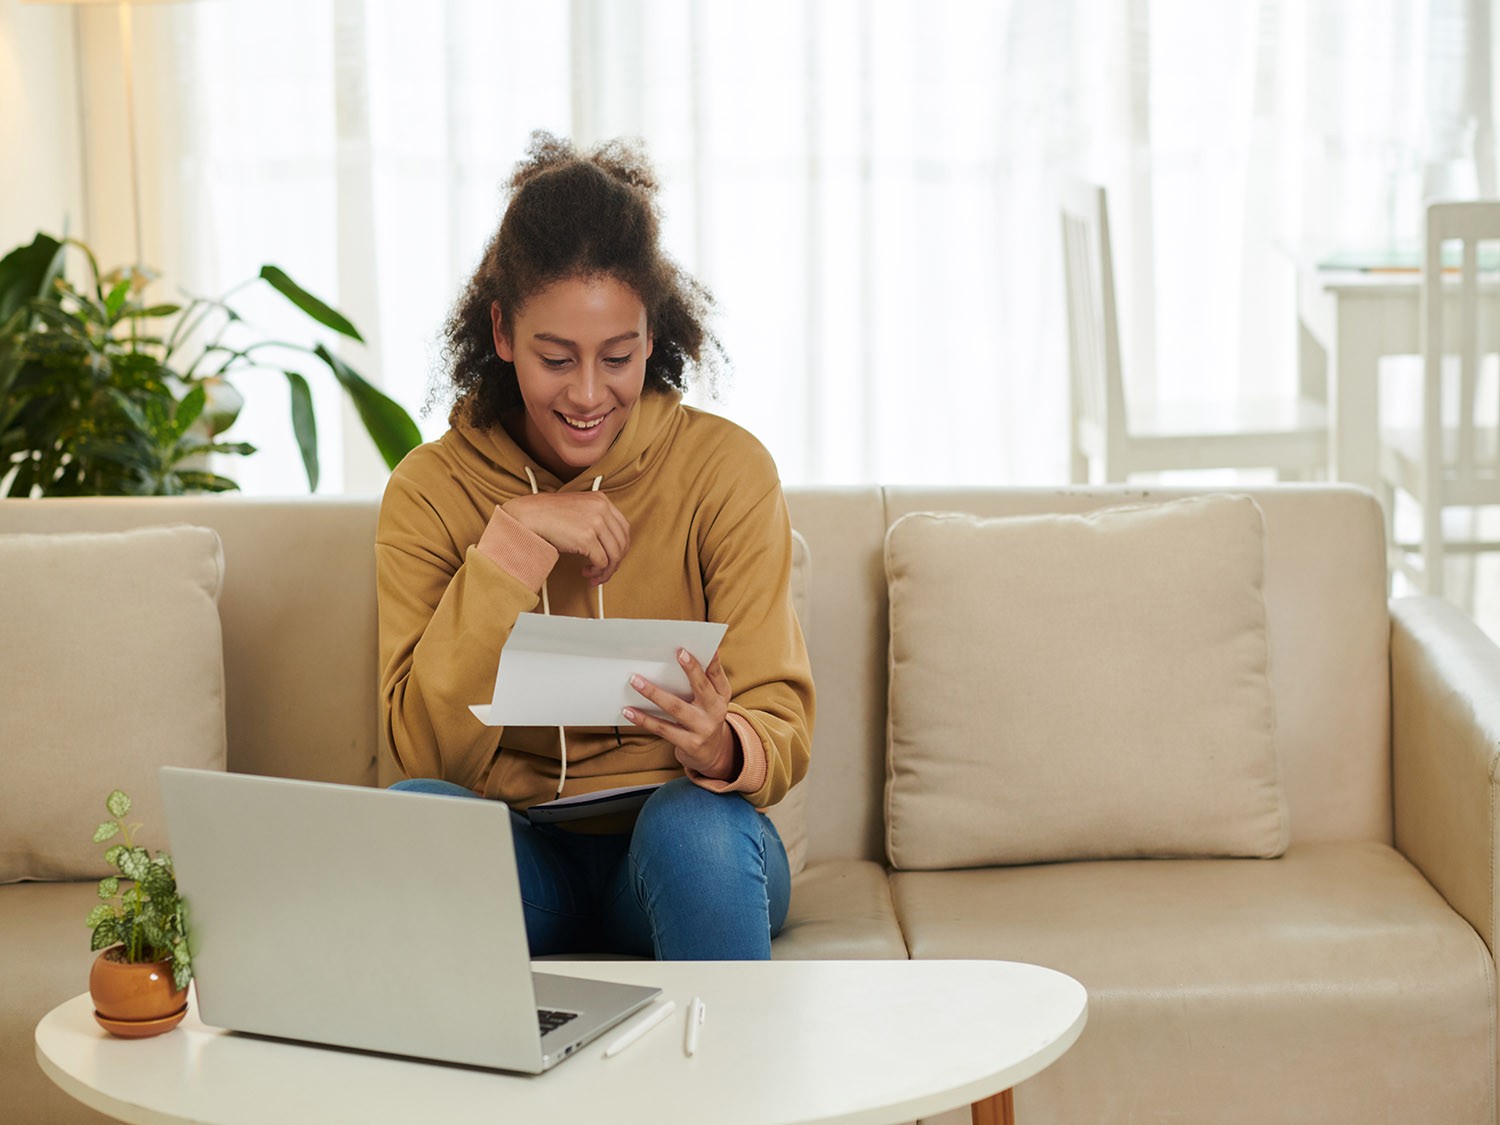 Girl reading over paperwork on couch with laptop